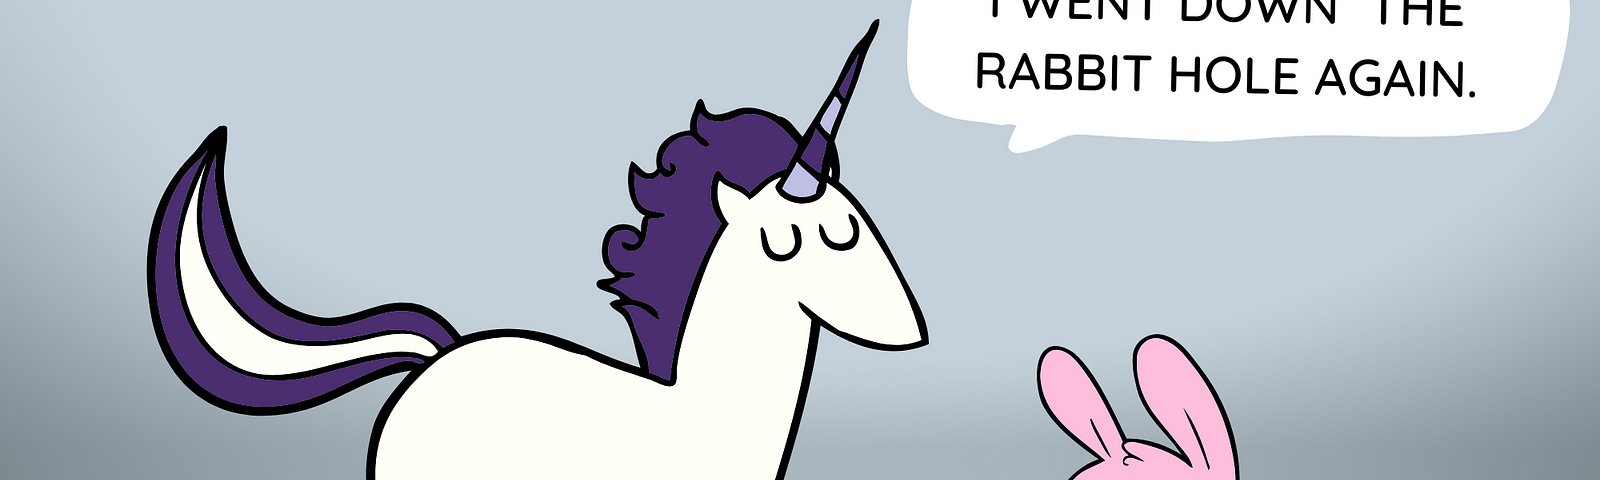 A cartoon unicorn with the text “I went down the rabbit hole again” in a speech bubble.